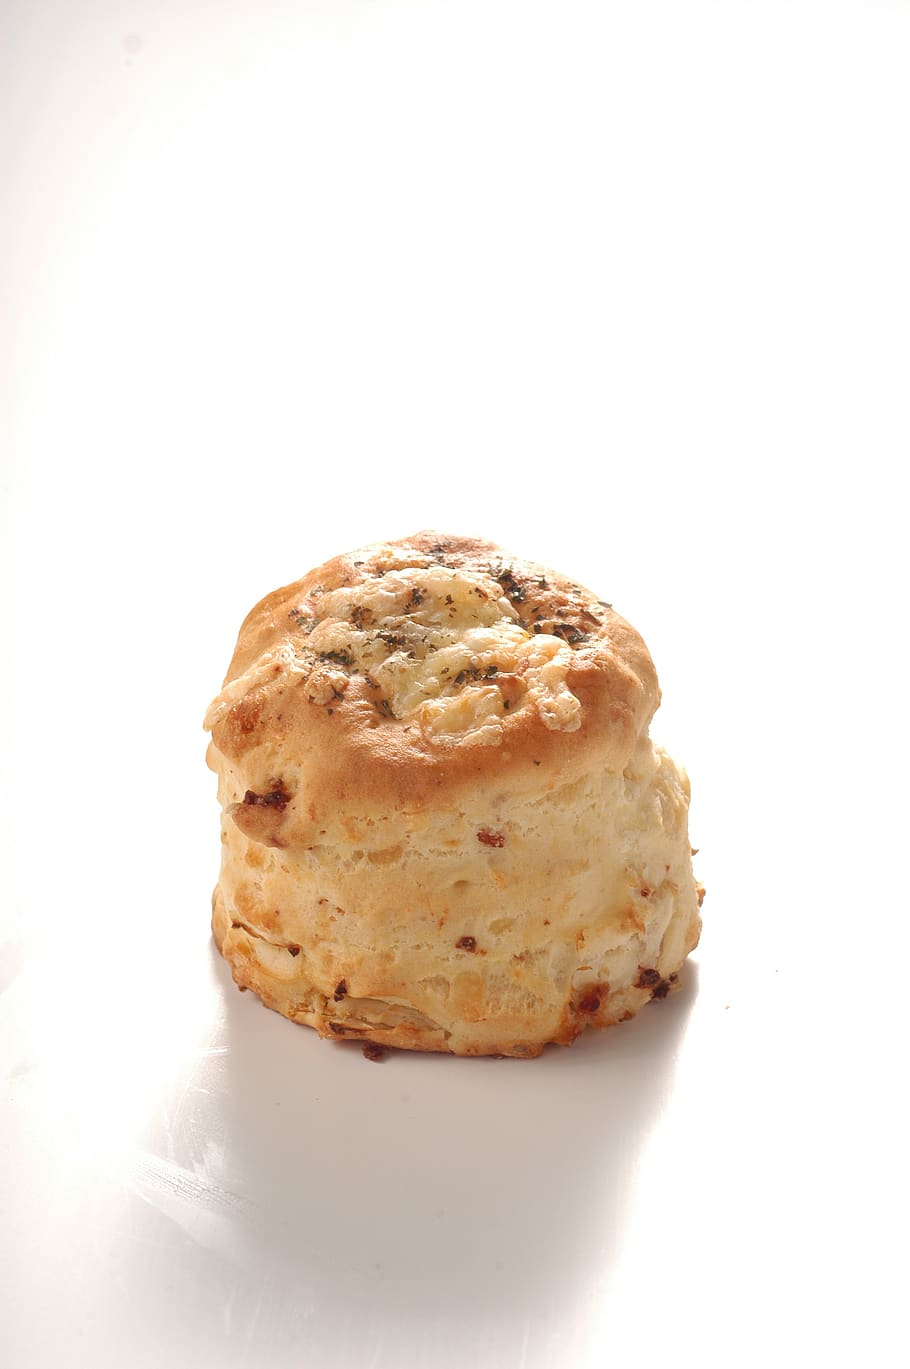 scone, yummy, breakfast, food and drink, food, studio shot, freshness, baked, white background, indoors